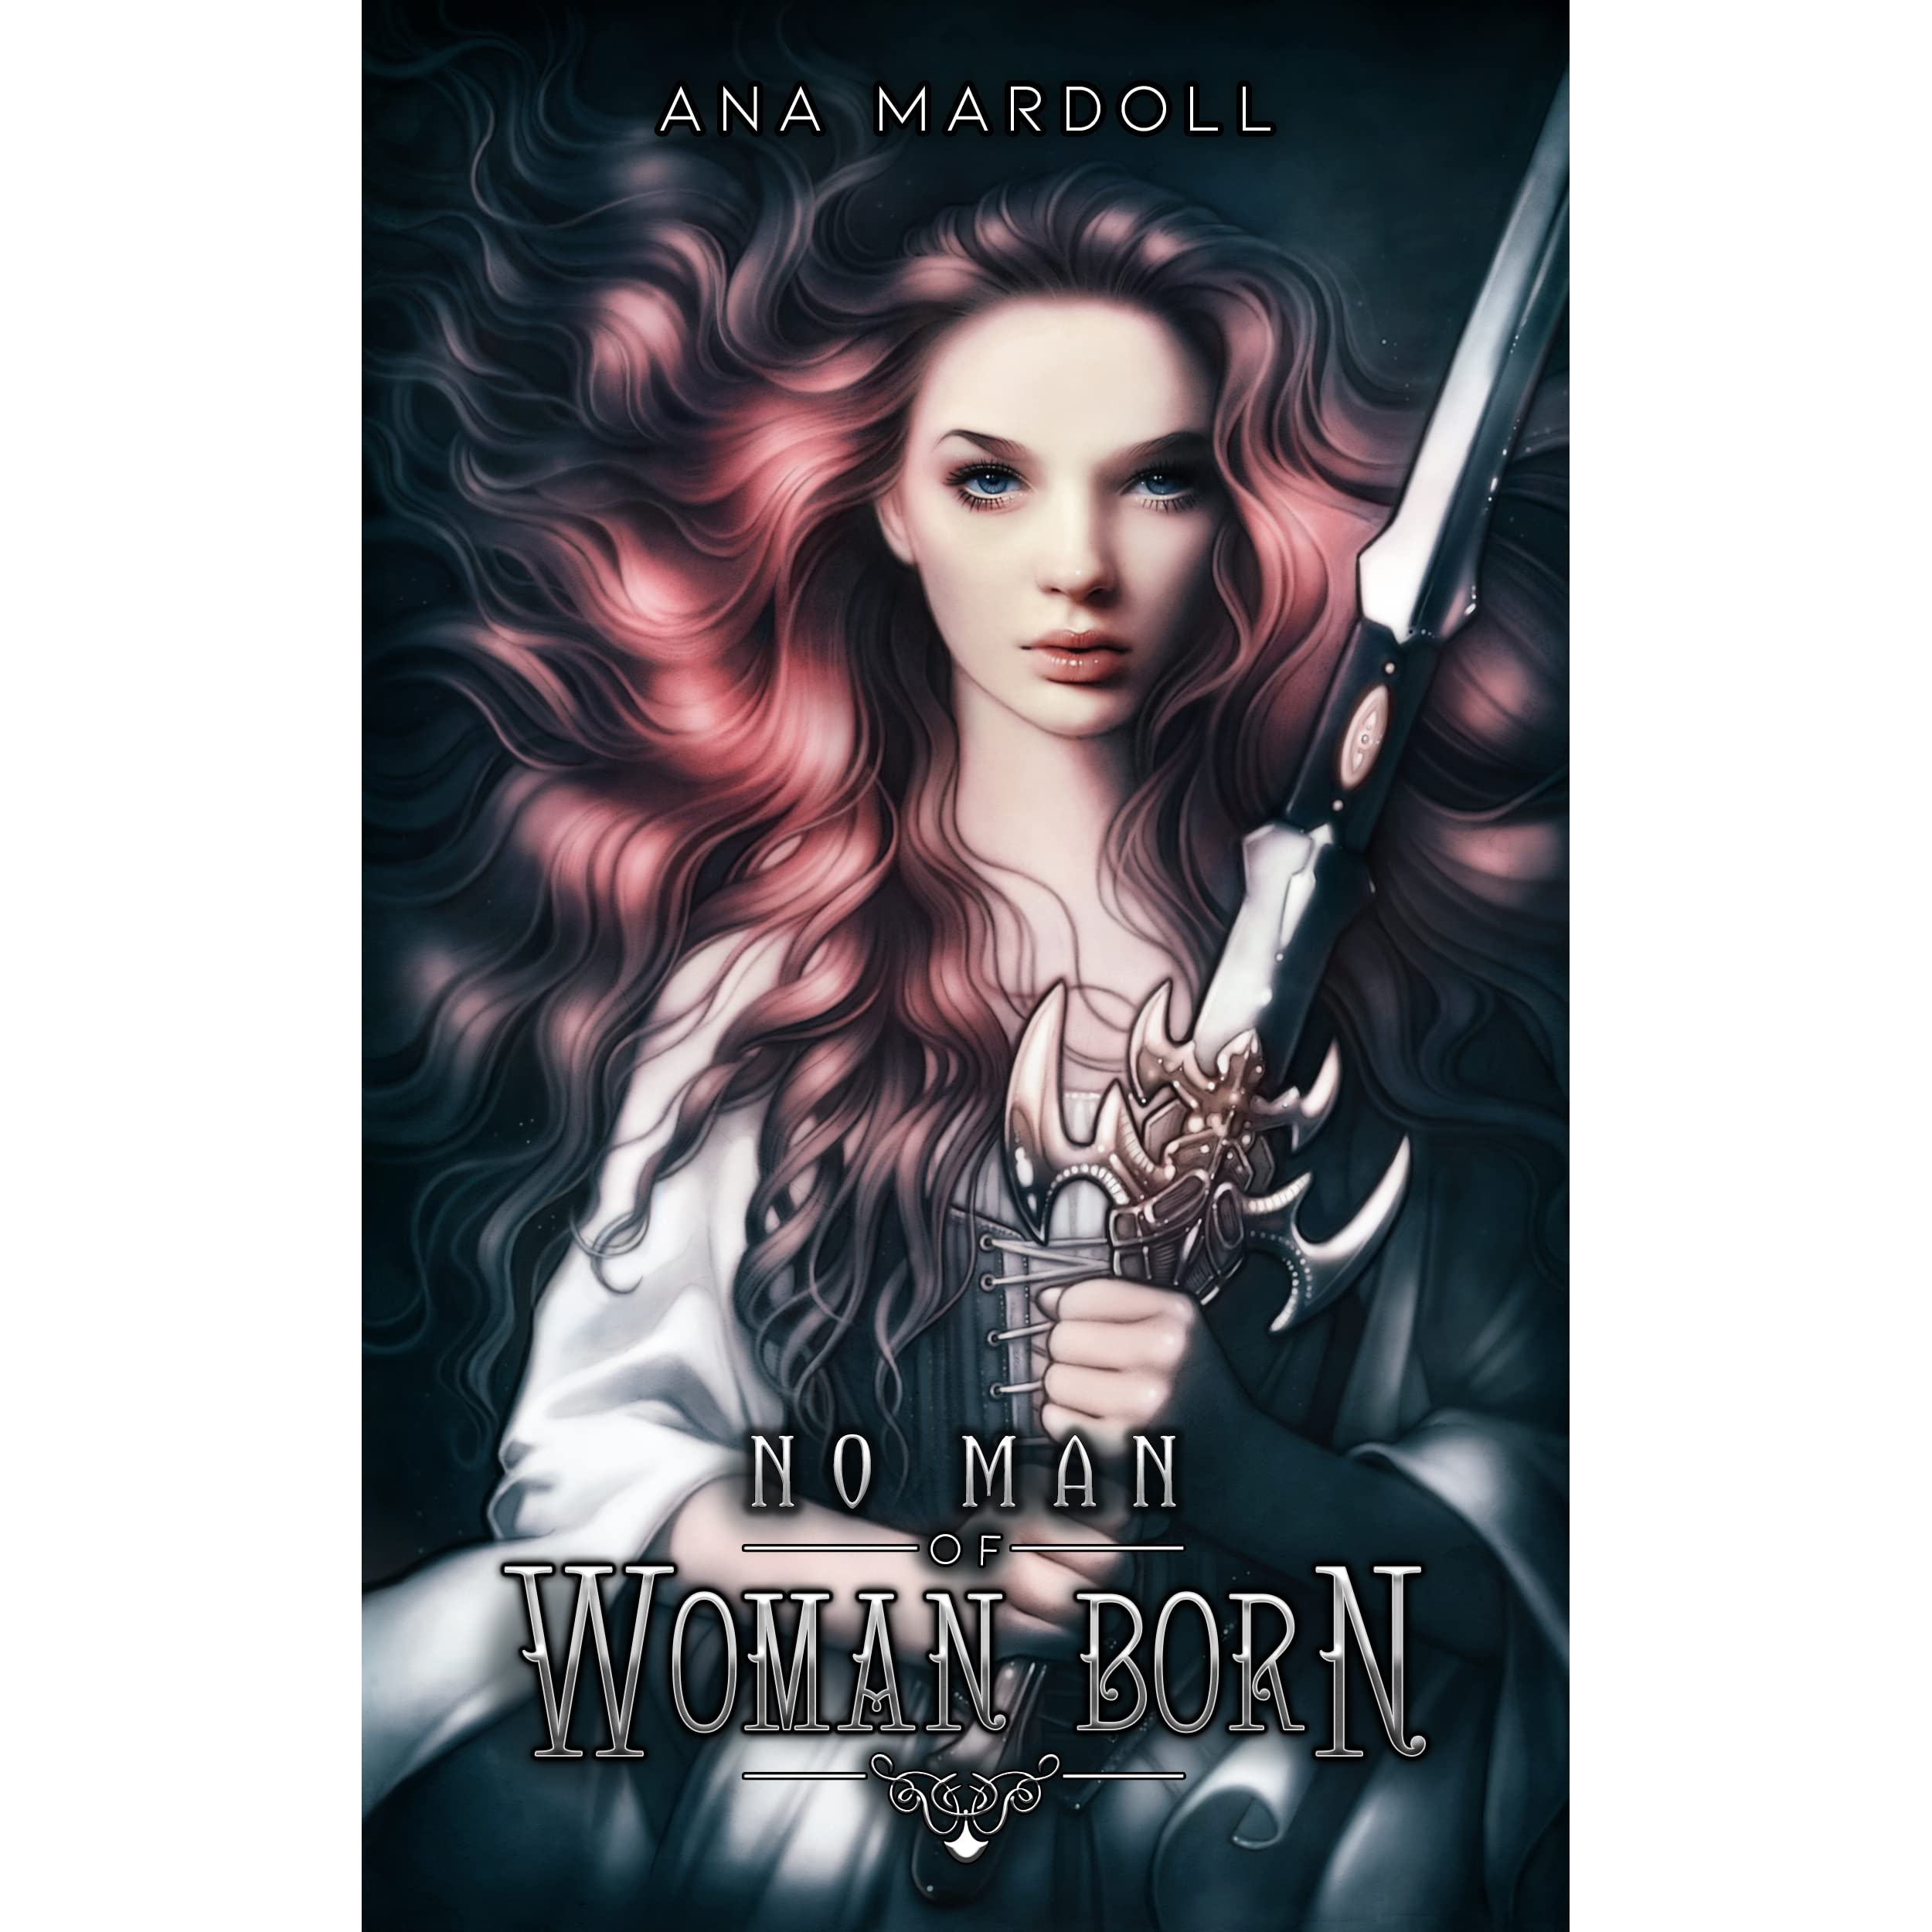 Cover of No Man of a Woman Born by Ana Mardoll